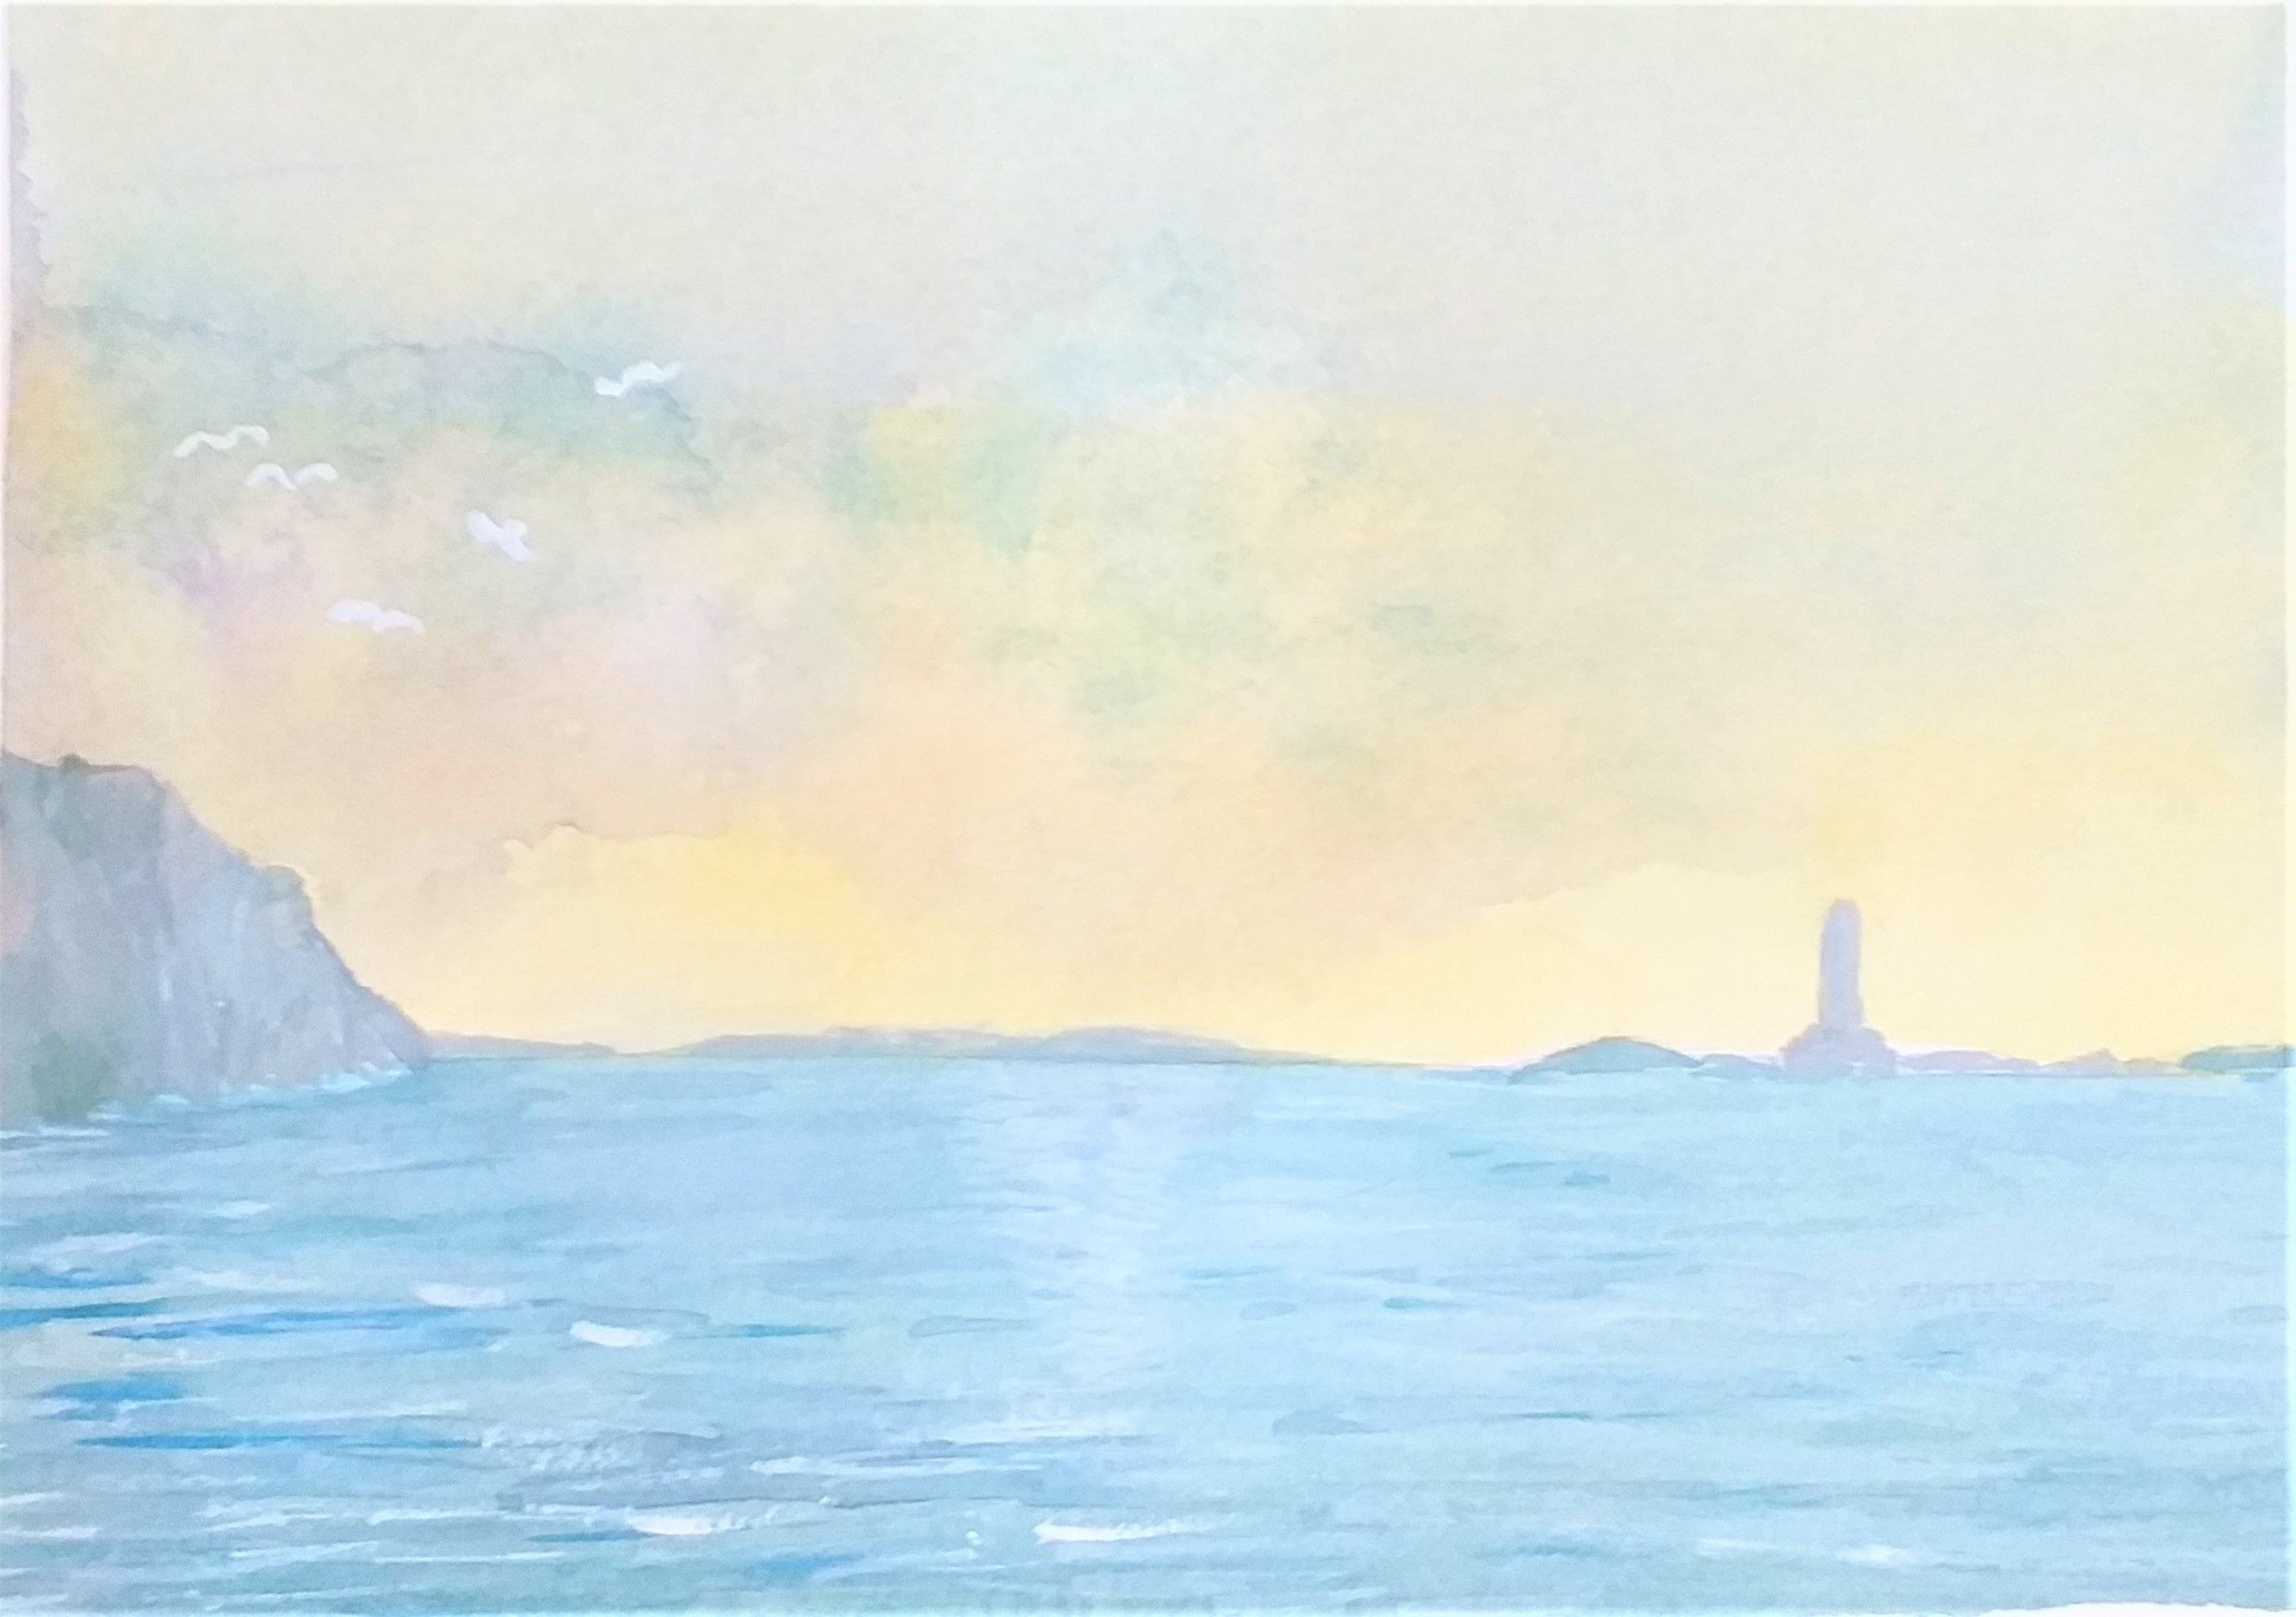 Jans-watercolour-seascape-created-at-Art-classes-by-Raya-in-West-Midlands